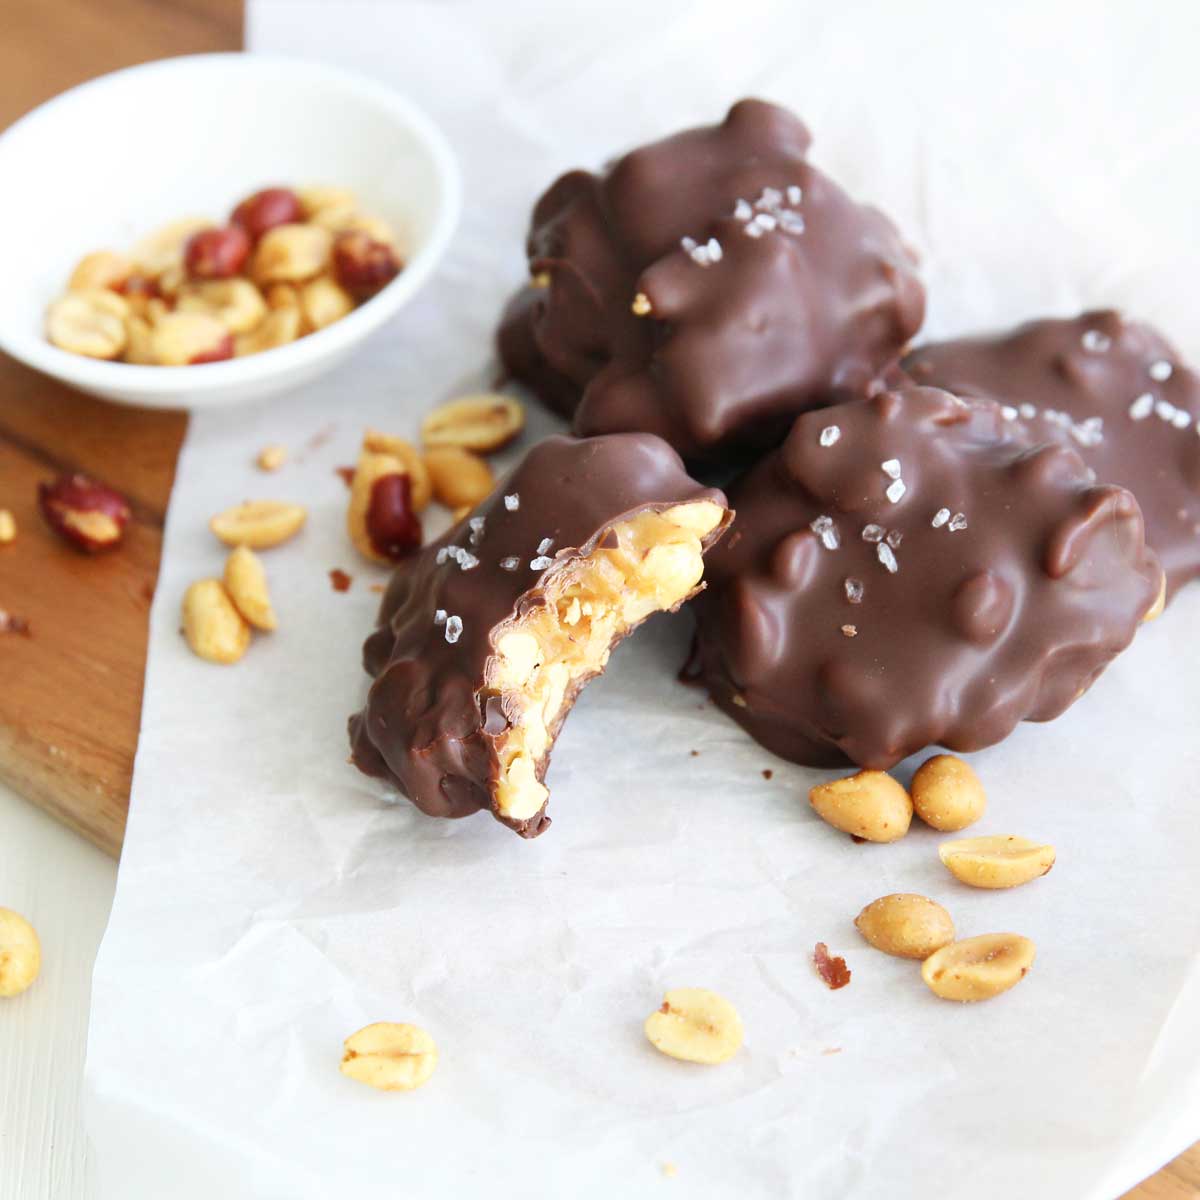 Chocolate Peanut Clusters with Collagen Caramel Filling (Easy, Keto Recipe) - Nutella Protein Bars